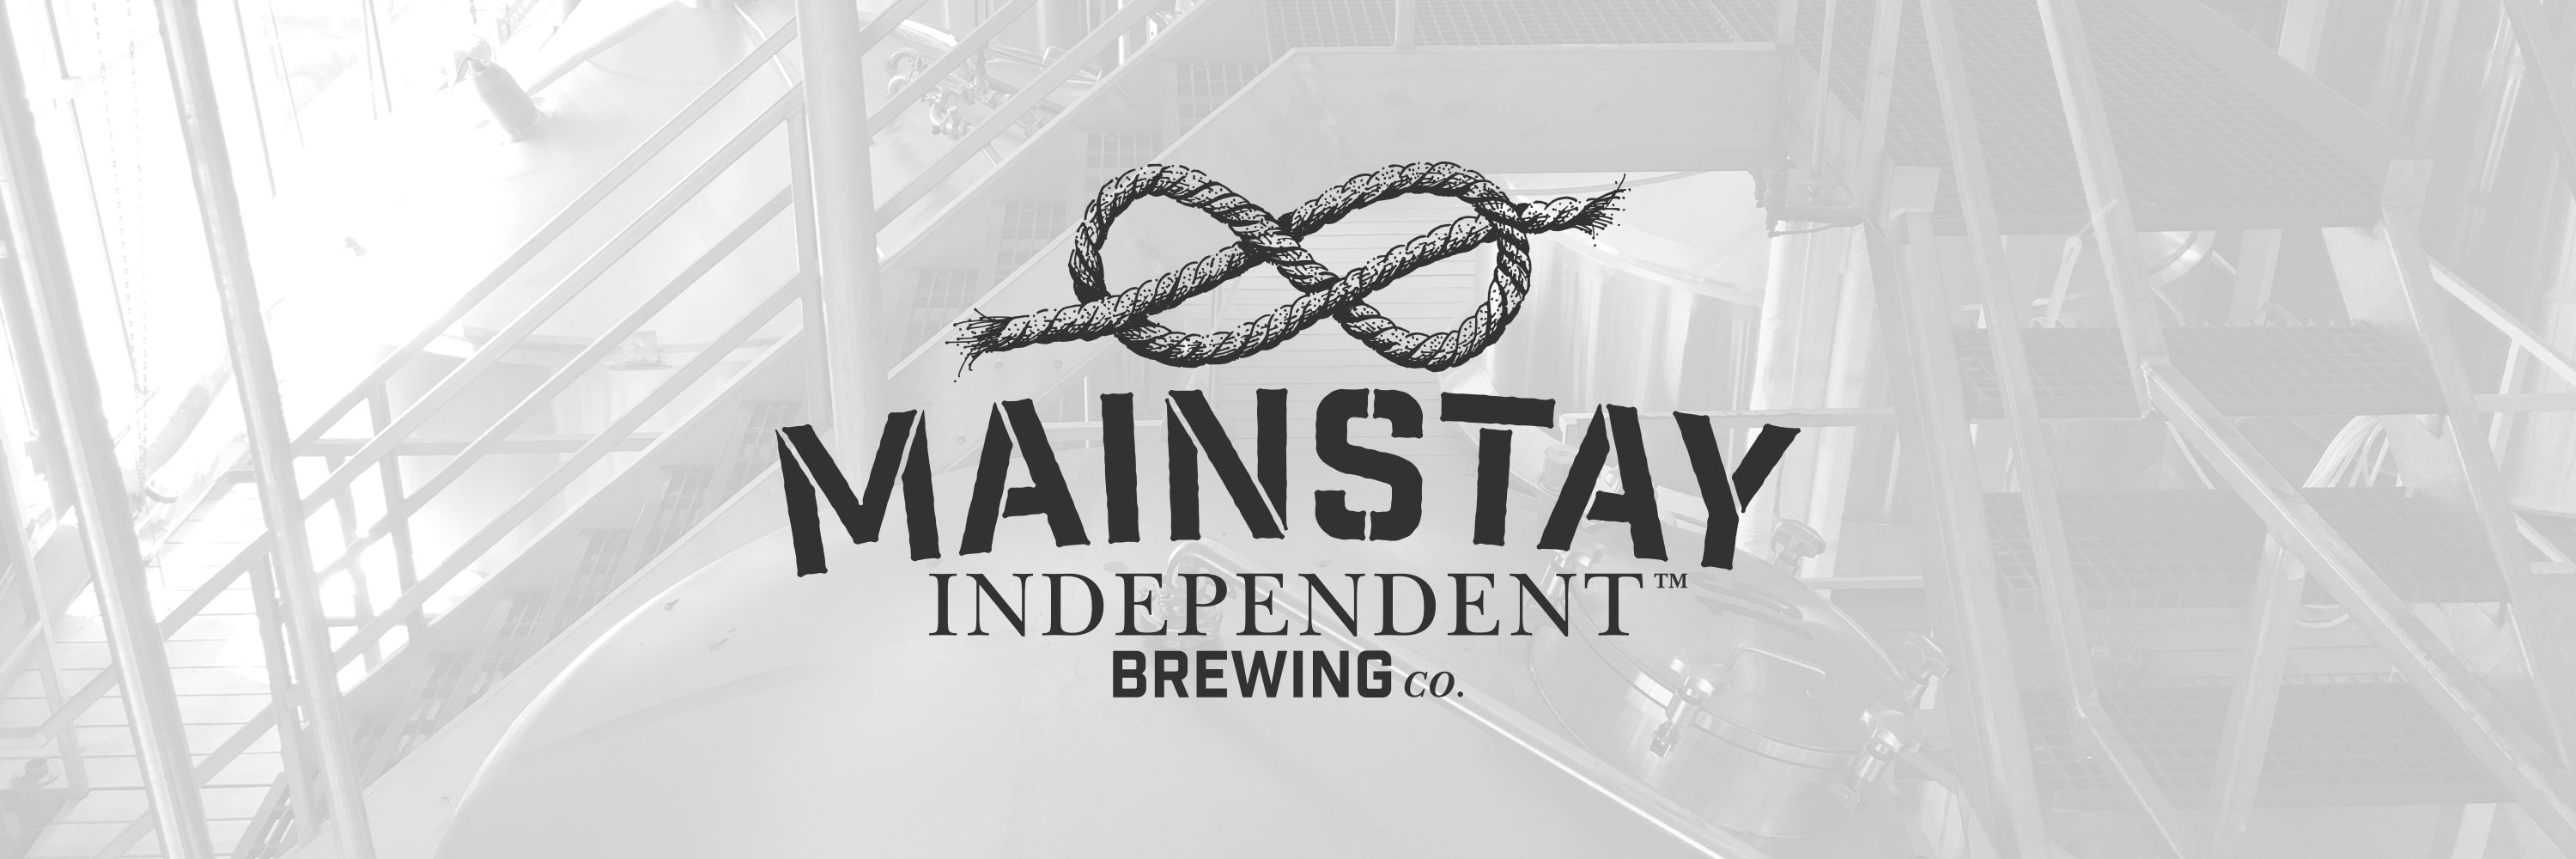 Mainstay Brewing Brewery Logo and Branding